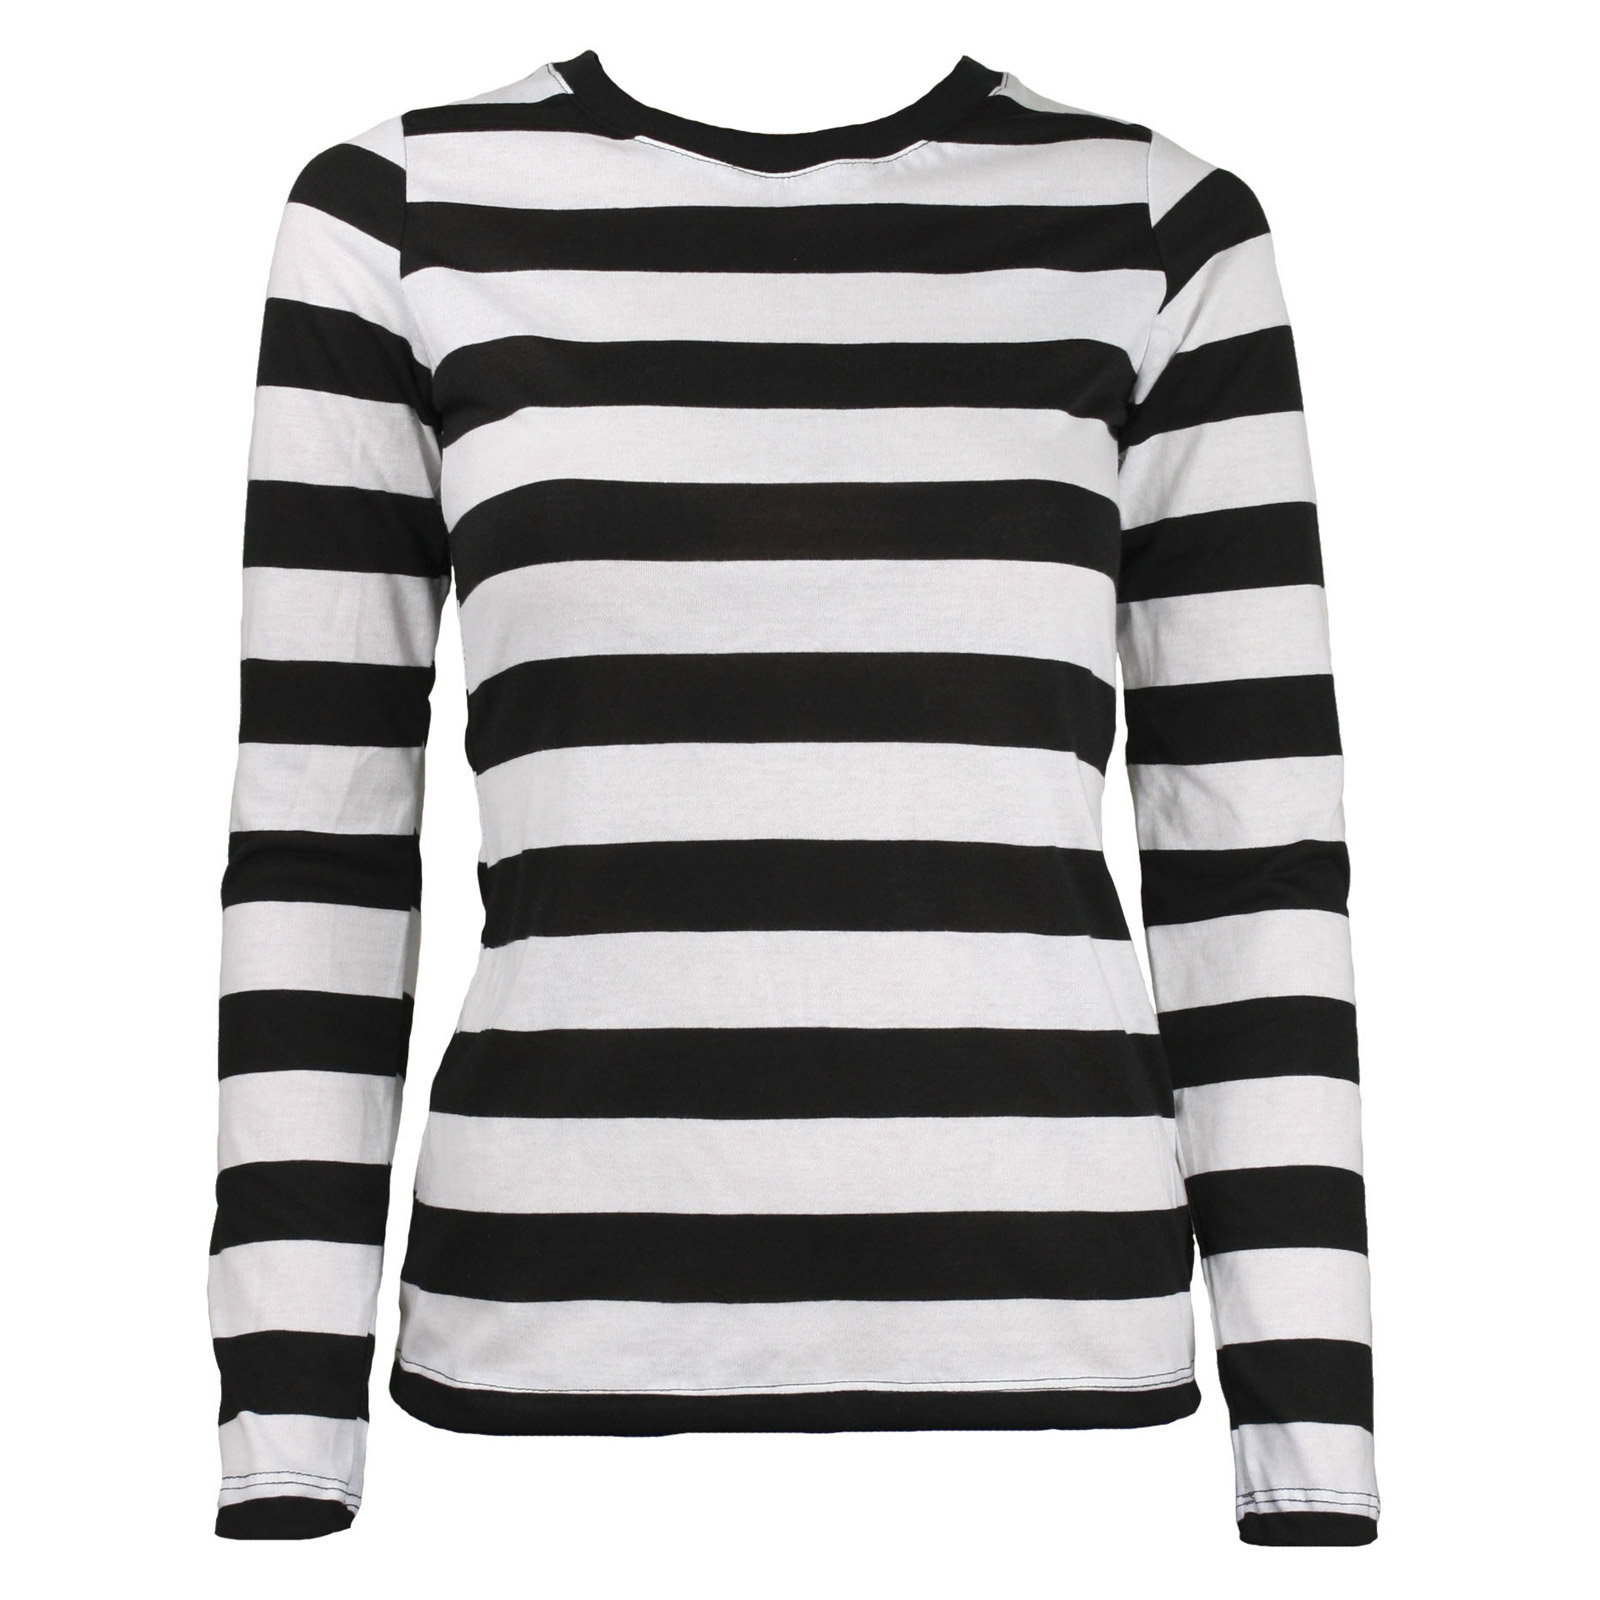 Womens Black And White Striped Shirt - South Park T Shirts